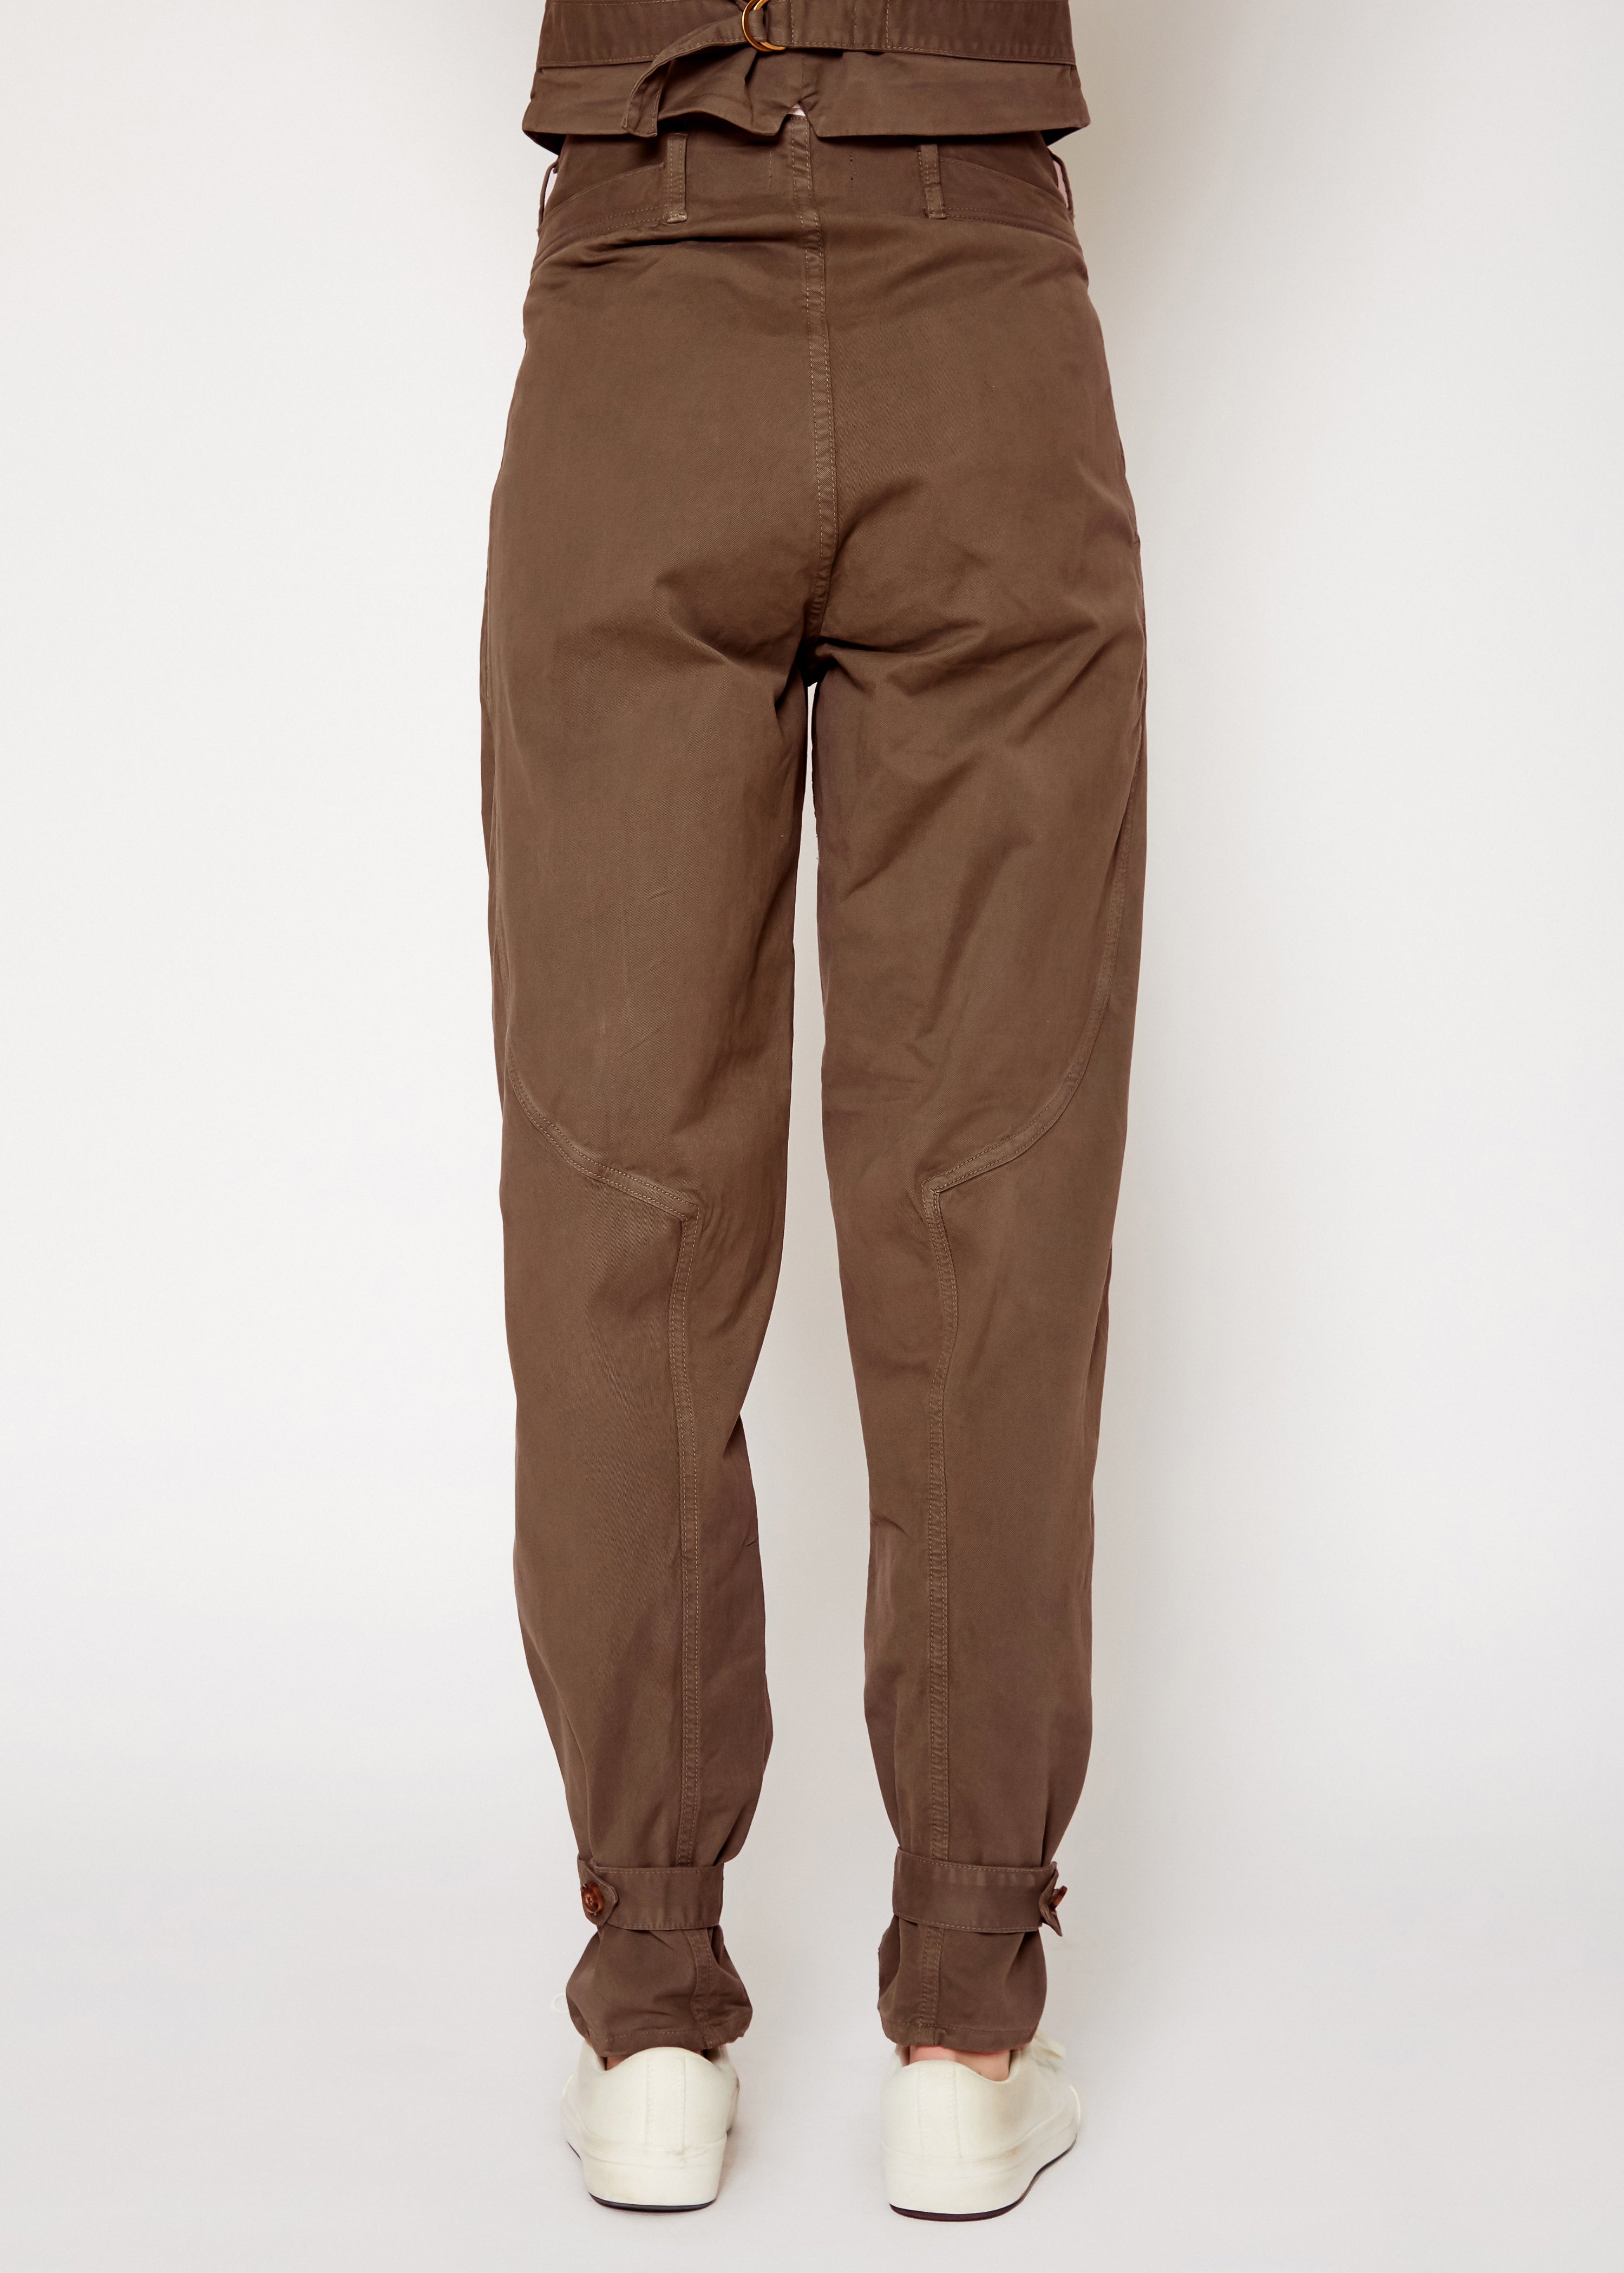 Syd Utility Balloon Pants In Coco - Noend Denim